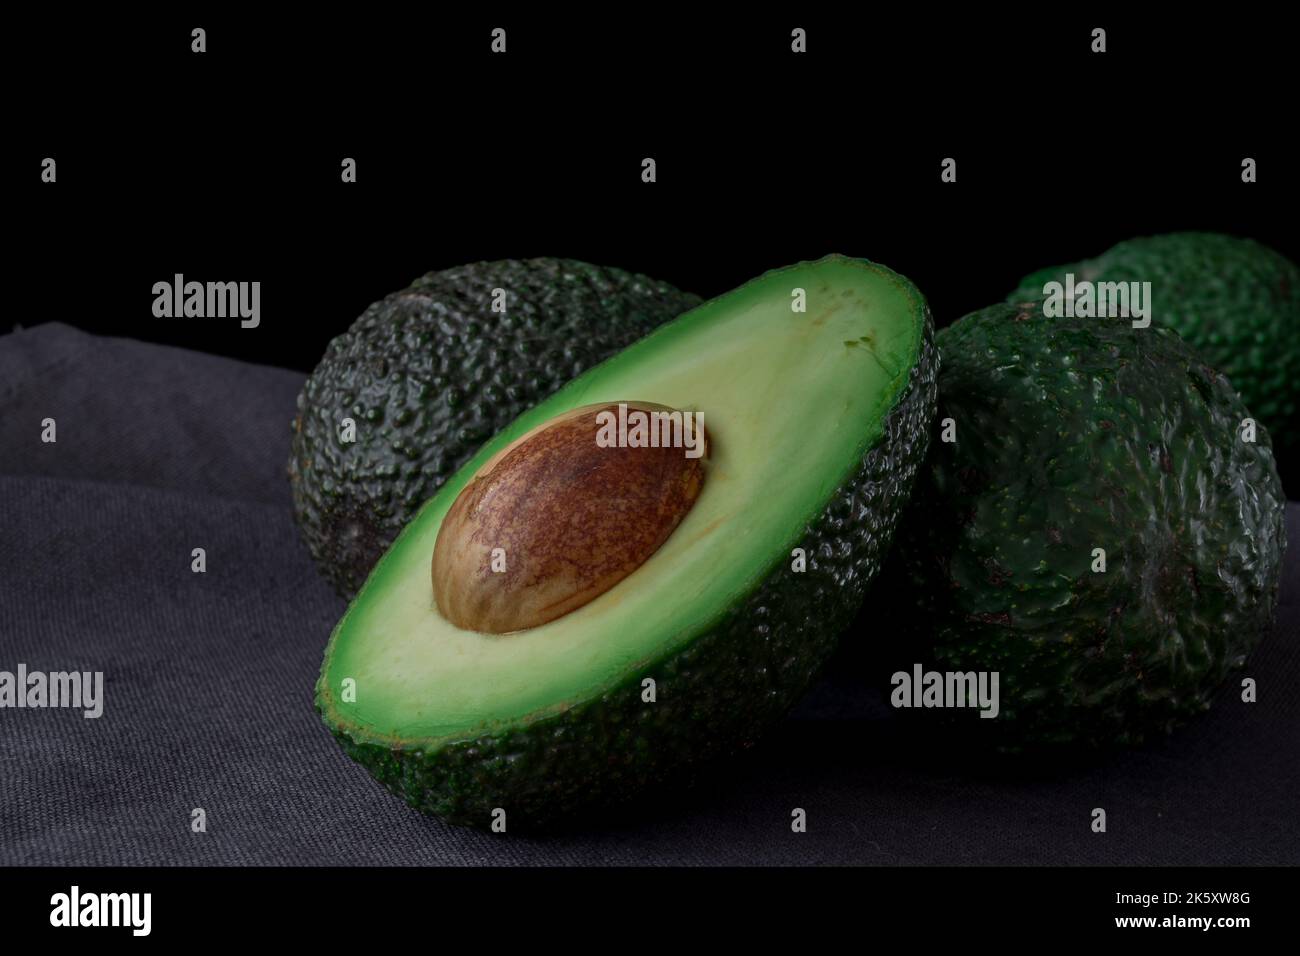 Persea americana fruit cut into two with seed, Avocado Stock Photo